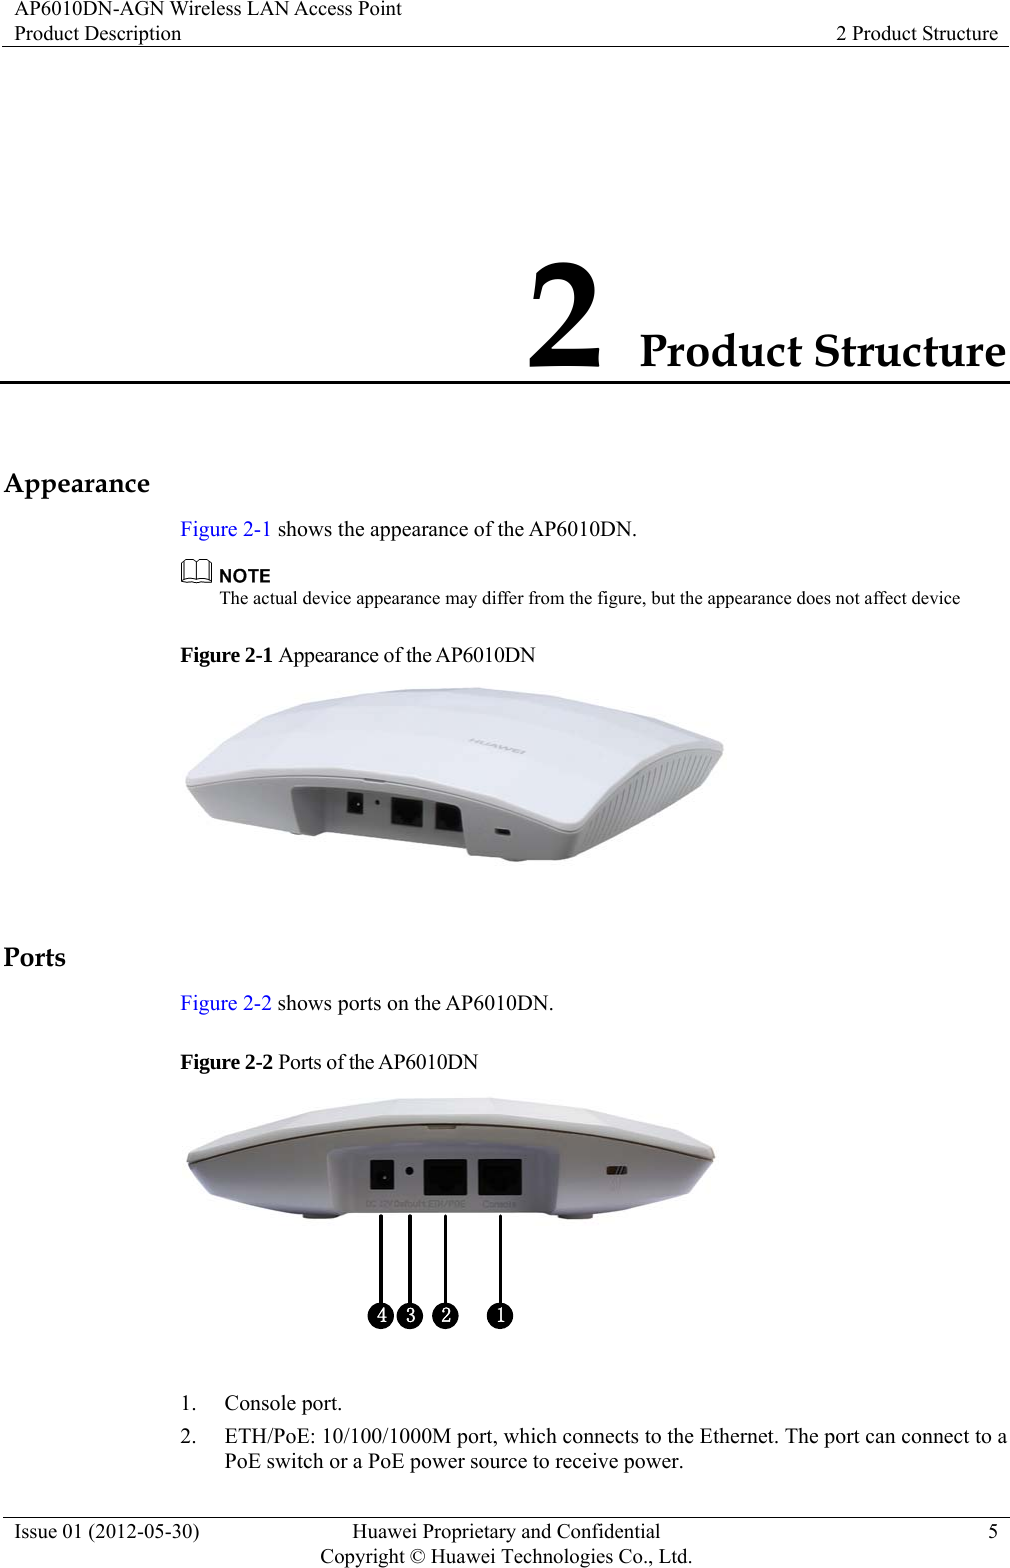 AP6010DN-AGN Wireless LAN Access Point Product Description  2 Product Structure Issue 01 (2012-05-30)  Huawei Proprietary and Confidential         Copyright © Huawei Technologies Co., Ltd.5 2 Product Structure Appearance Figure 2-1 shows the appearance of the AP6010DN.  The actual device appearance may differ from the figure, but the appearance does not affect device   Figure 2-1 Appearance of the AP6010DN   Ports Figure 2-2 shows ports on the AP6010DN. Figure 2-2 Ports of the AP6010DN 4 2 13  1. Console port. 2. ETH/PoE: 10/100/1000M port, which connects to the Ethernet. The port can connect to a PoE switch or a PoE power source to receive power. 